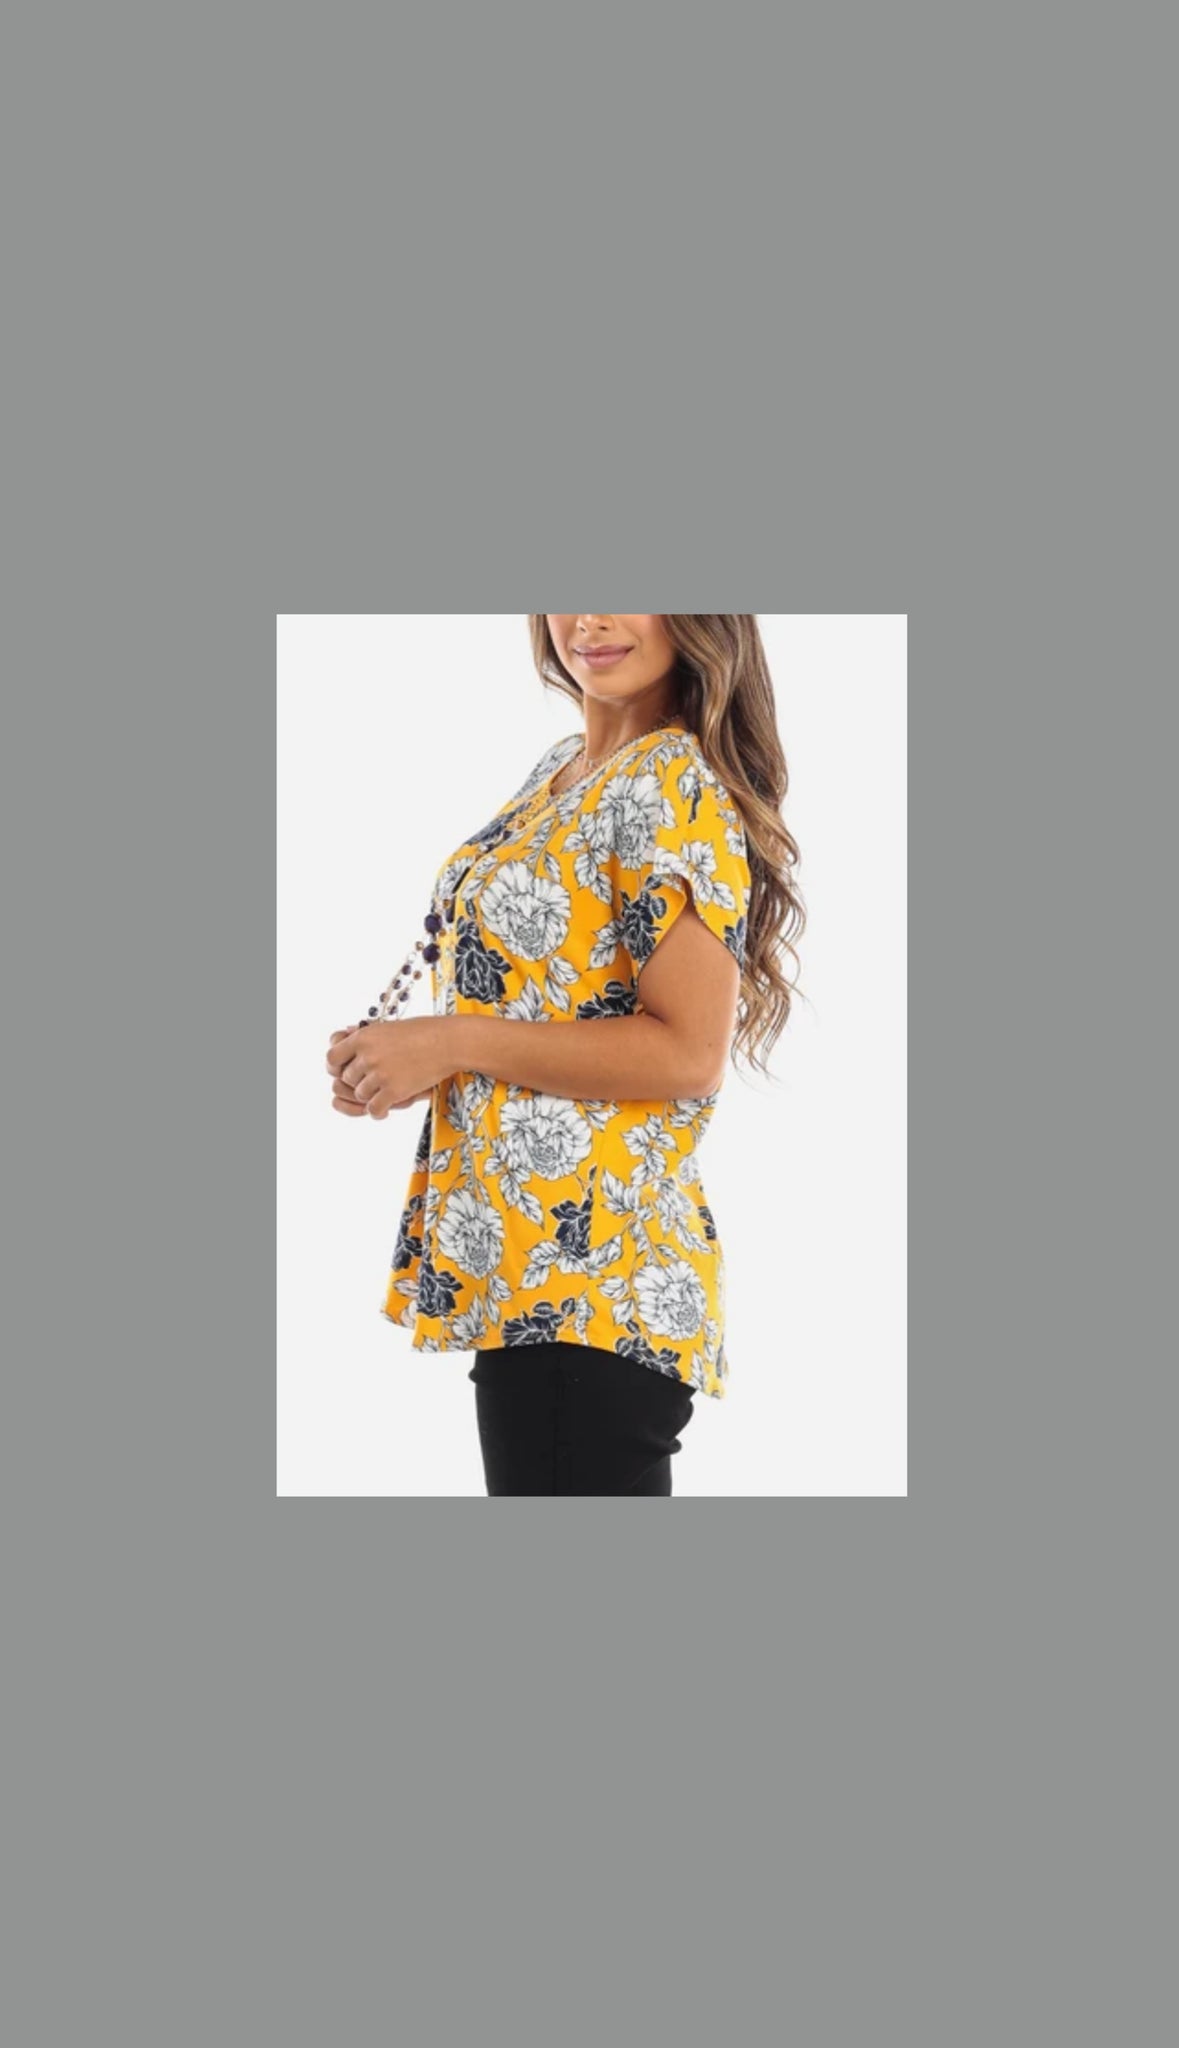 Mustard Floral Blouse with Detachable Necklace